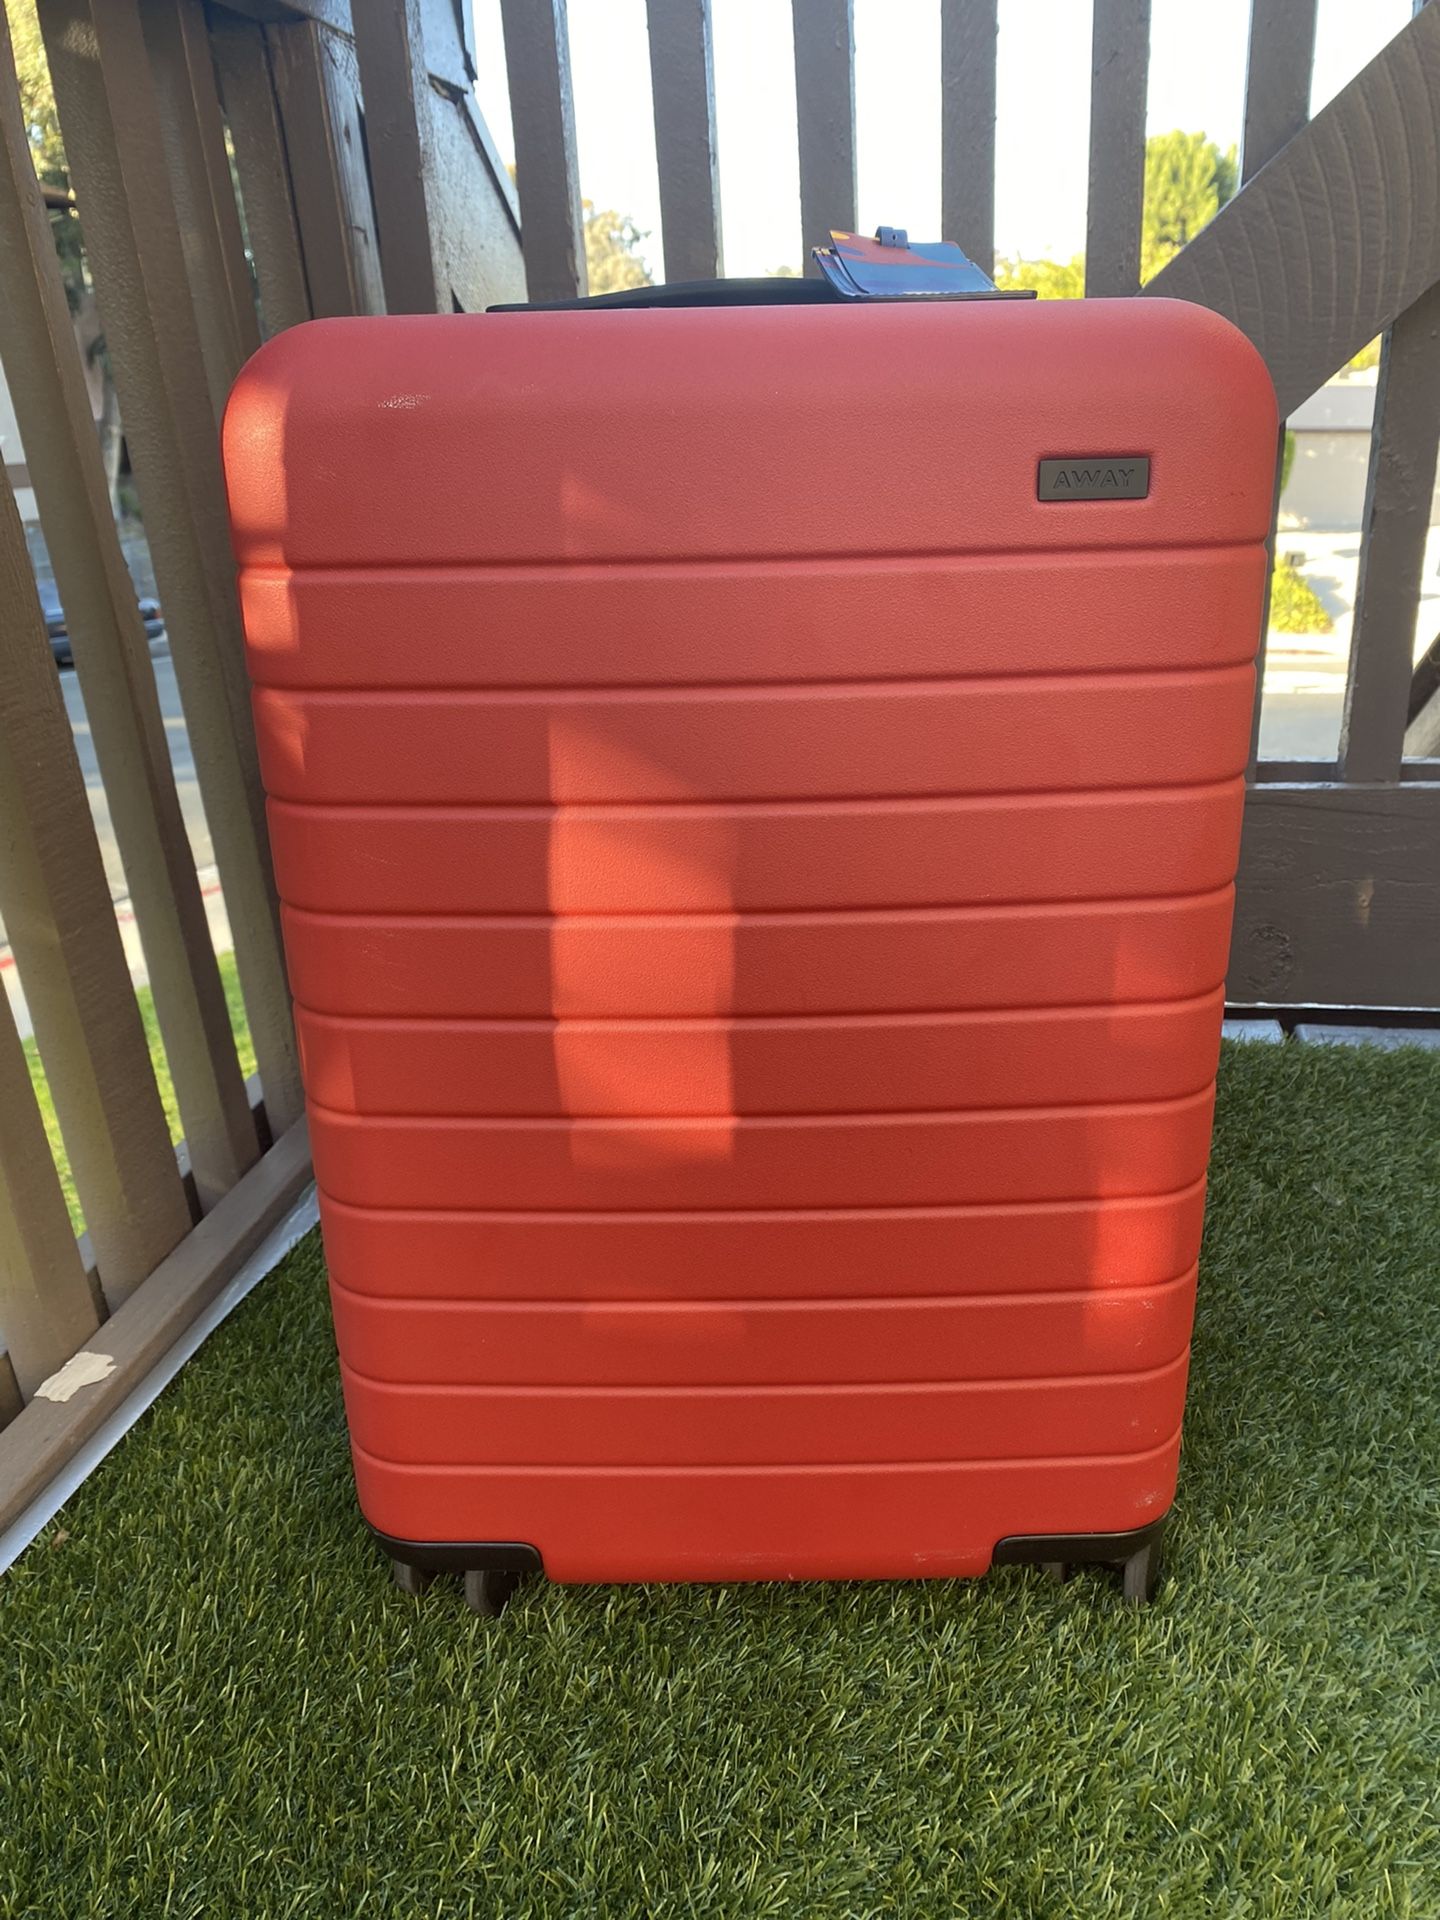 Away Carry On Suit Case Bag + Portable Charger 